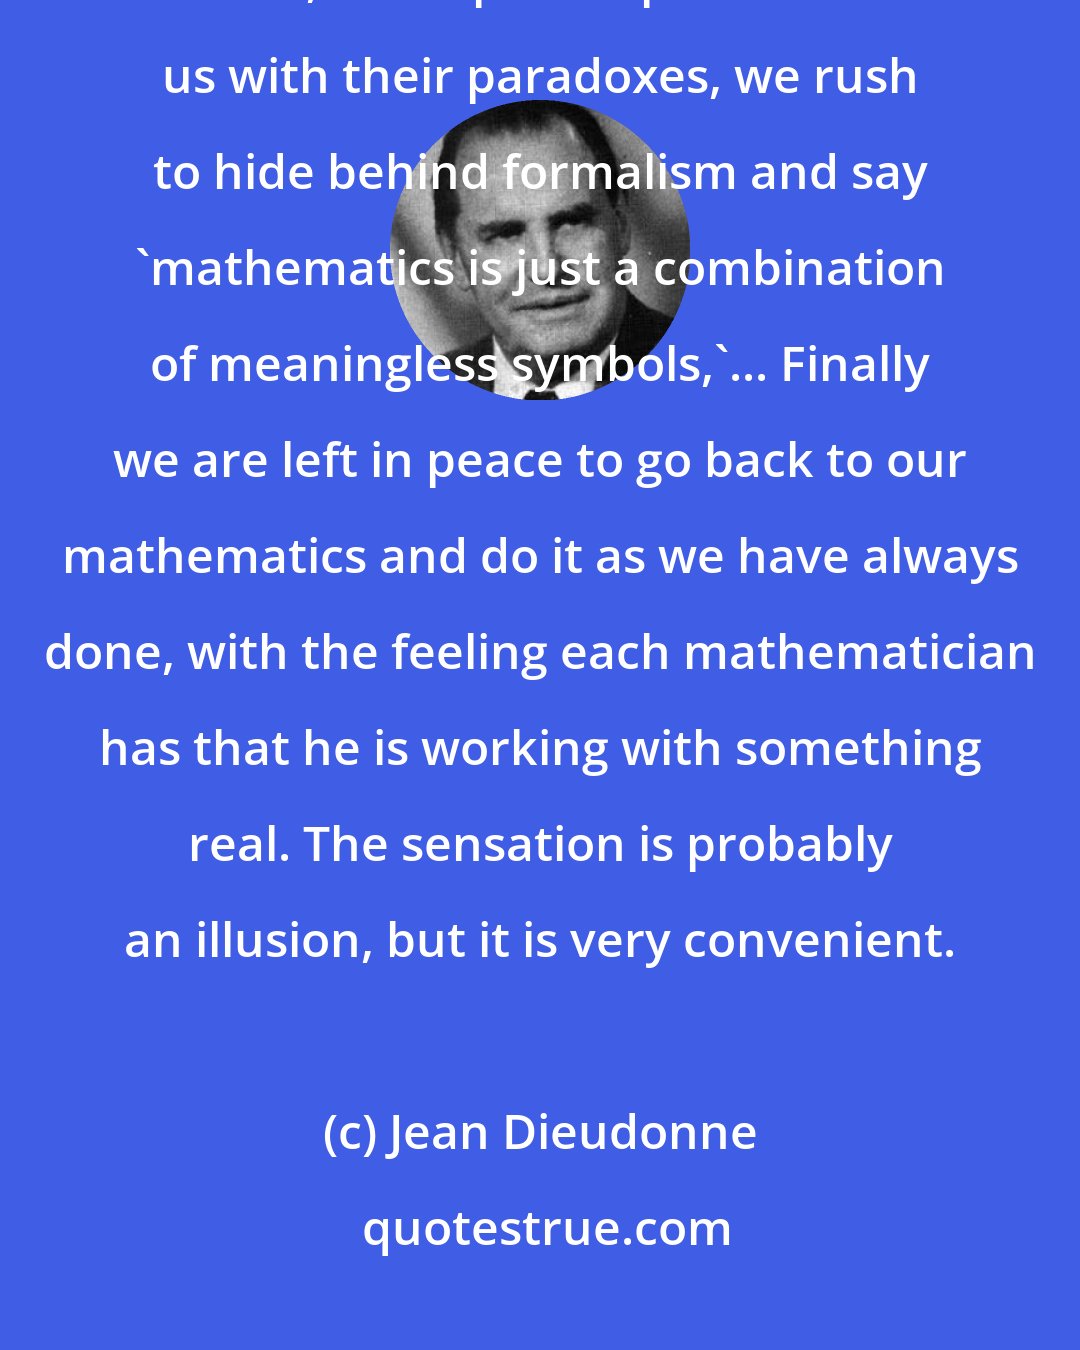 Jean Dieudonne: On foundations we believe in the reality of mathematics, but of course, when philosophers attack us with their paradoxes, we rush to hide behind formalism and say 'mathematics is just a combination of meaningless symbols,'... Finally we are left in peace to go back to our mathematics and do it as we have always done, with the feeling each mathematician has that he is working with something real. The sensation is probably an illusion, but it is very convenient.